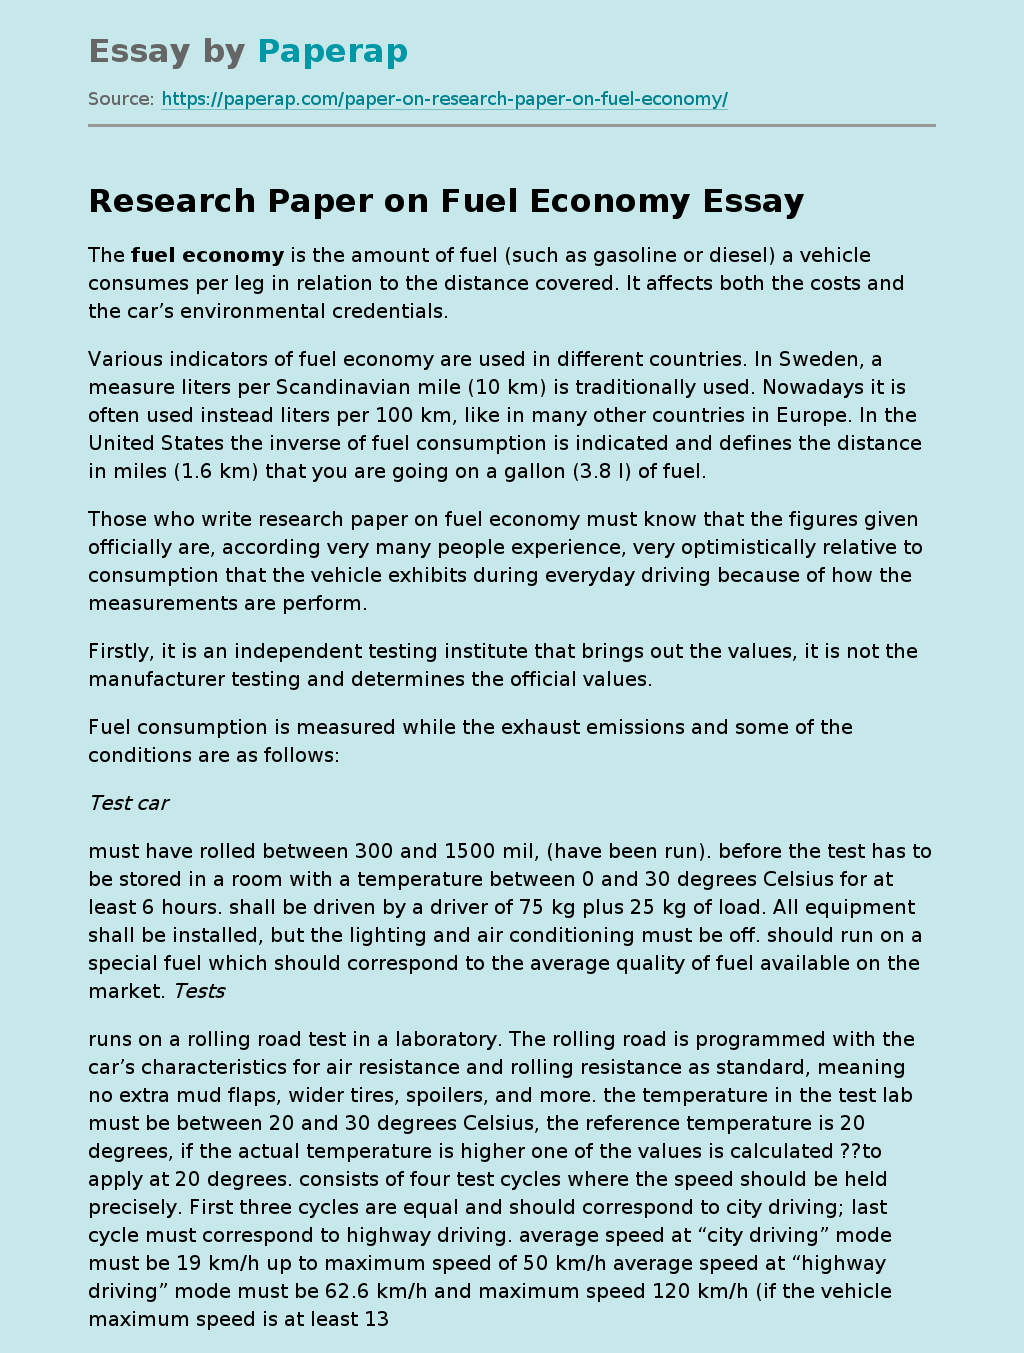 Research Paper on Fuel Economy